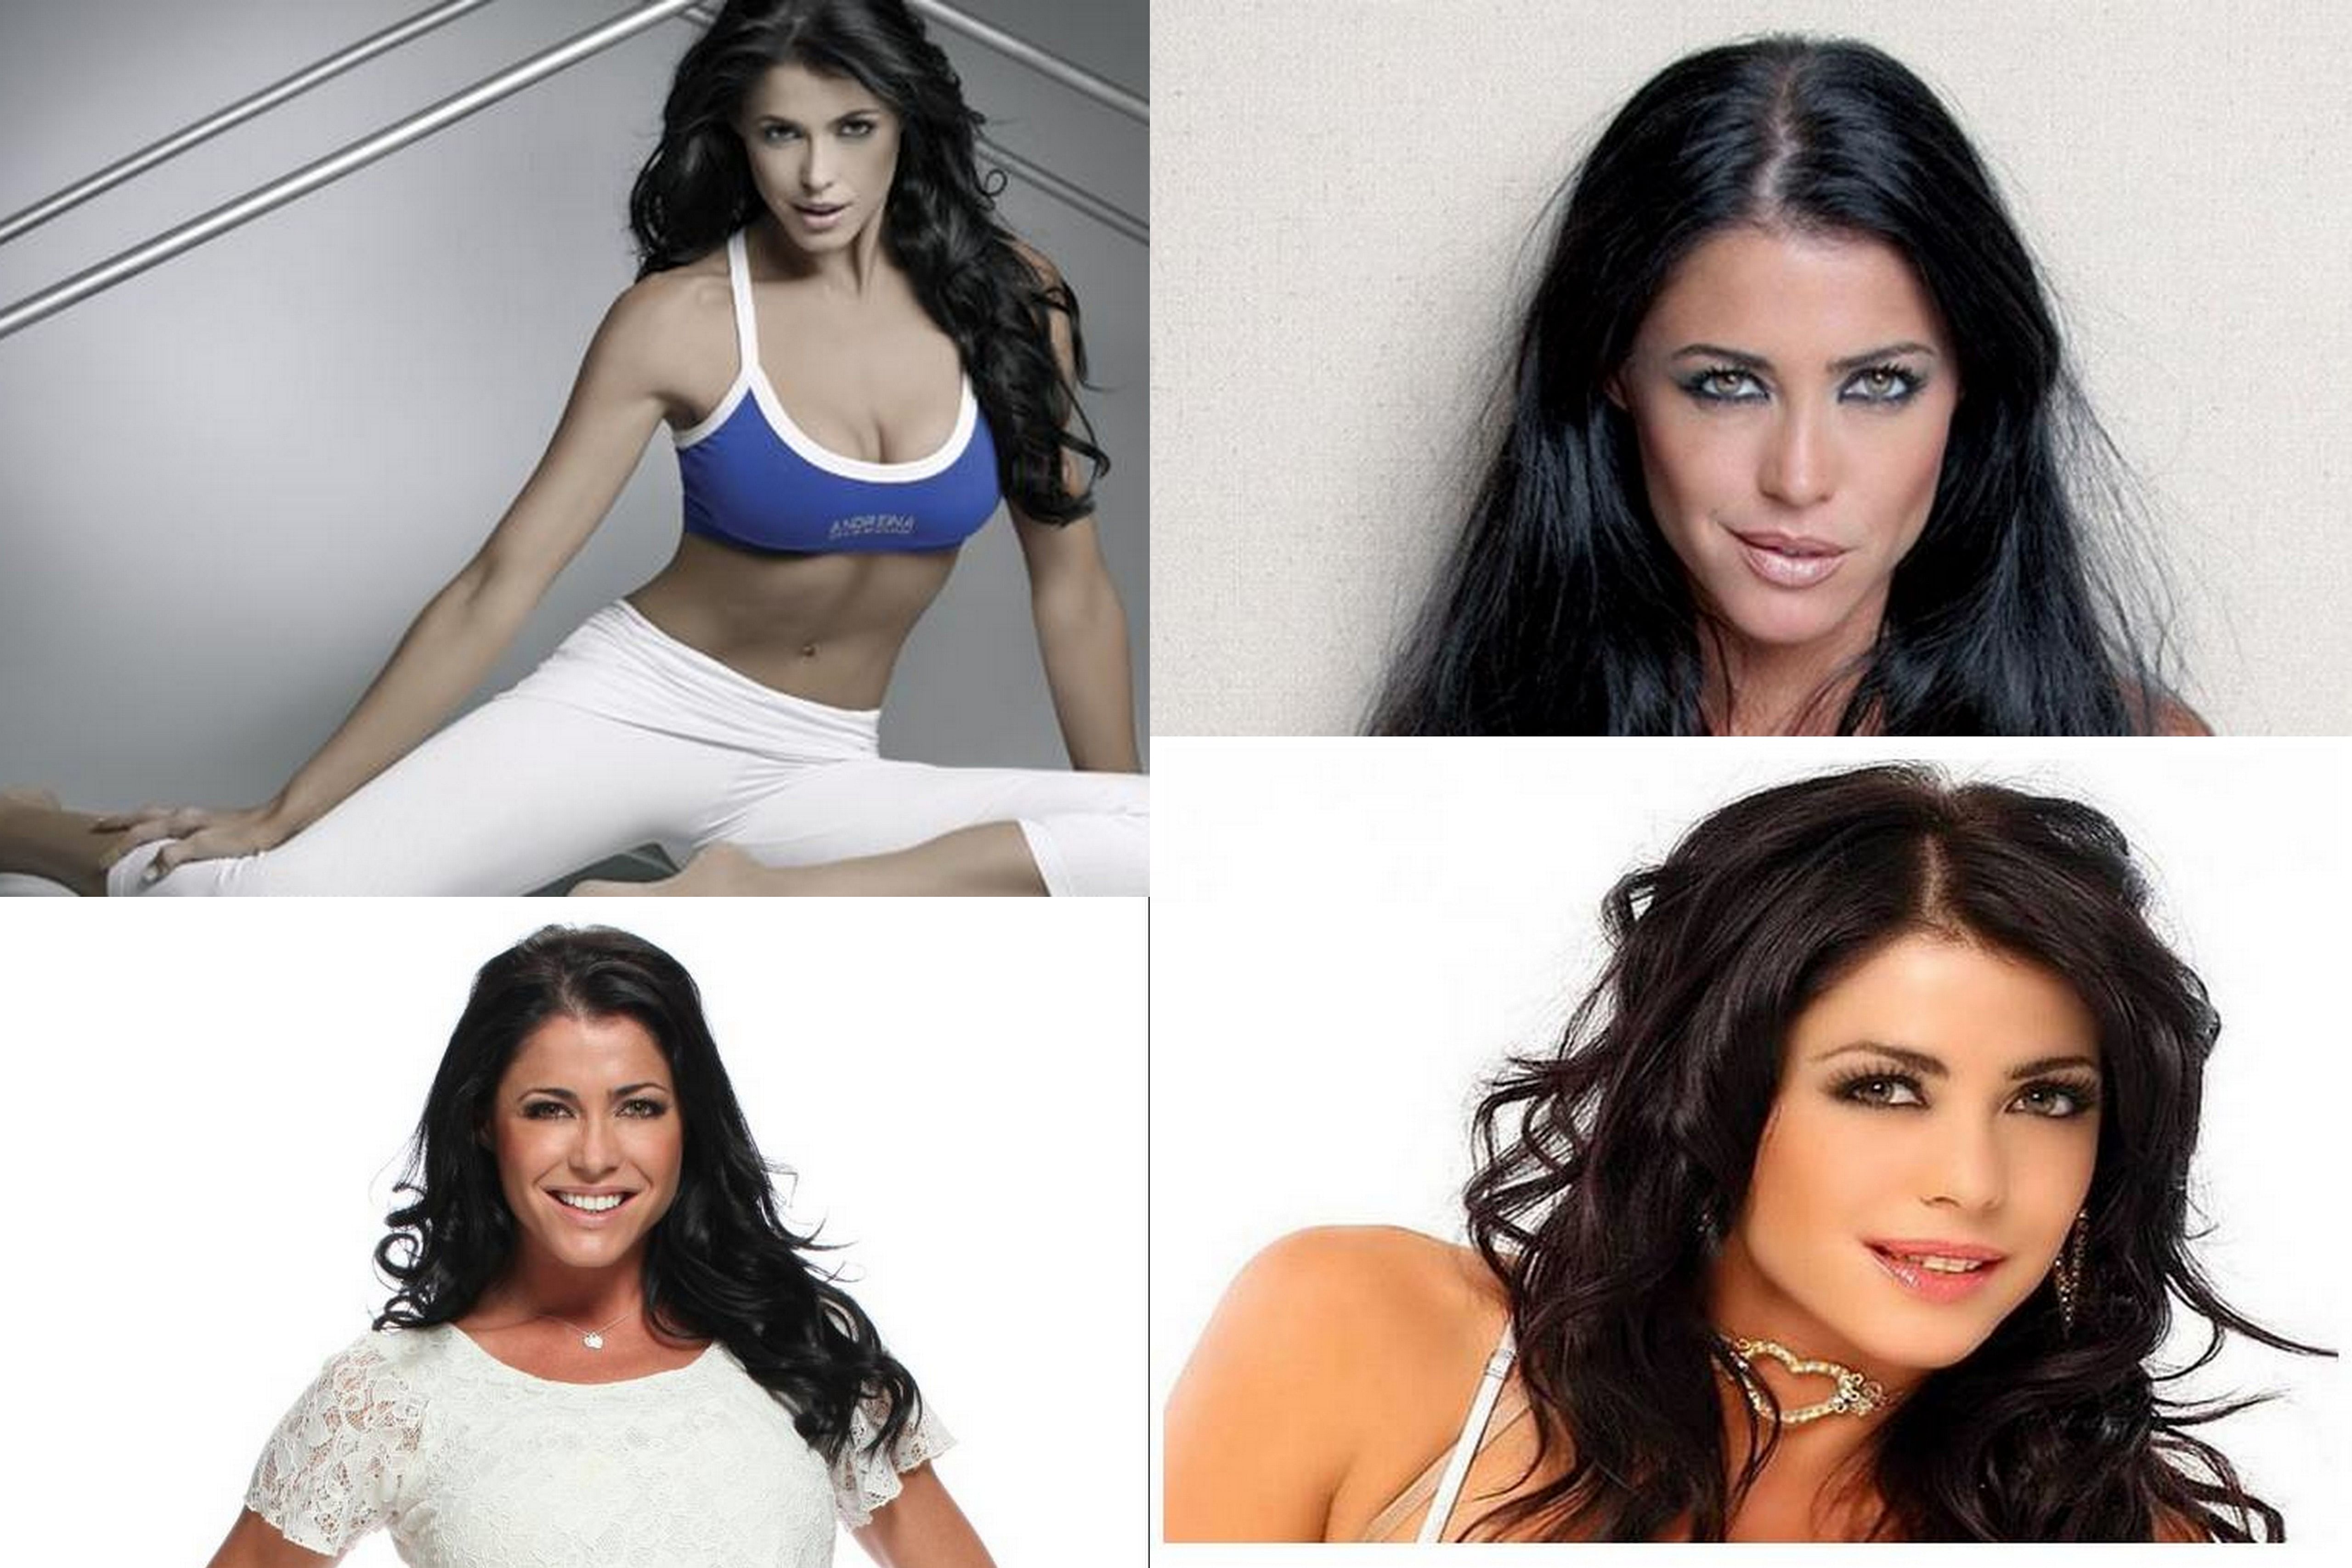 The top 10 hottest female football presenters - Slide 10 of 10